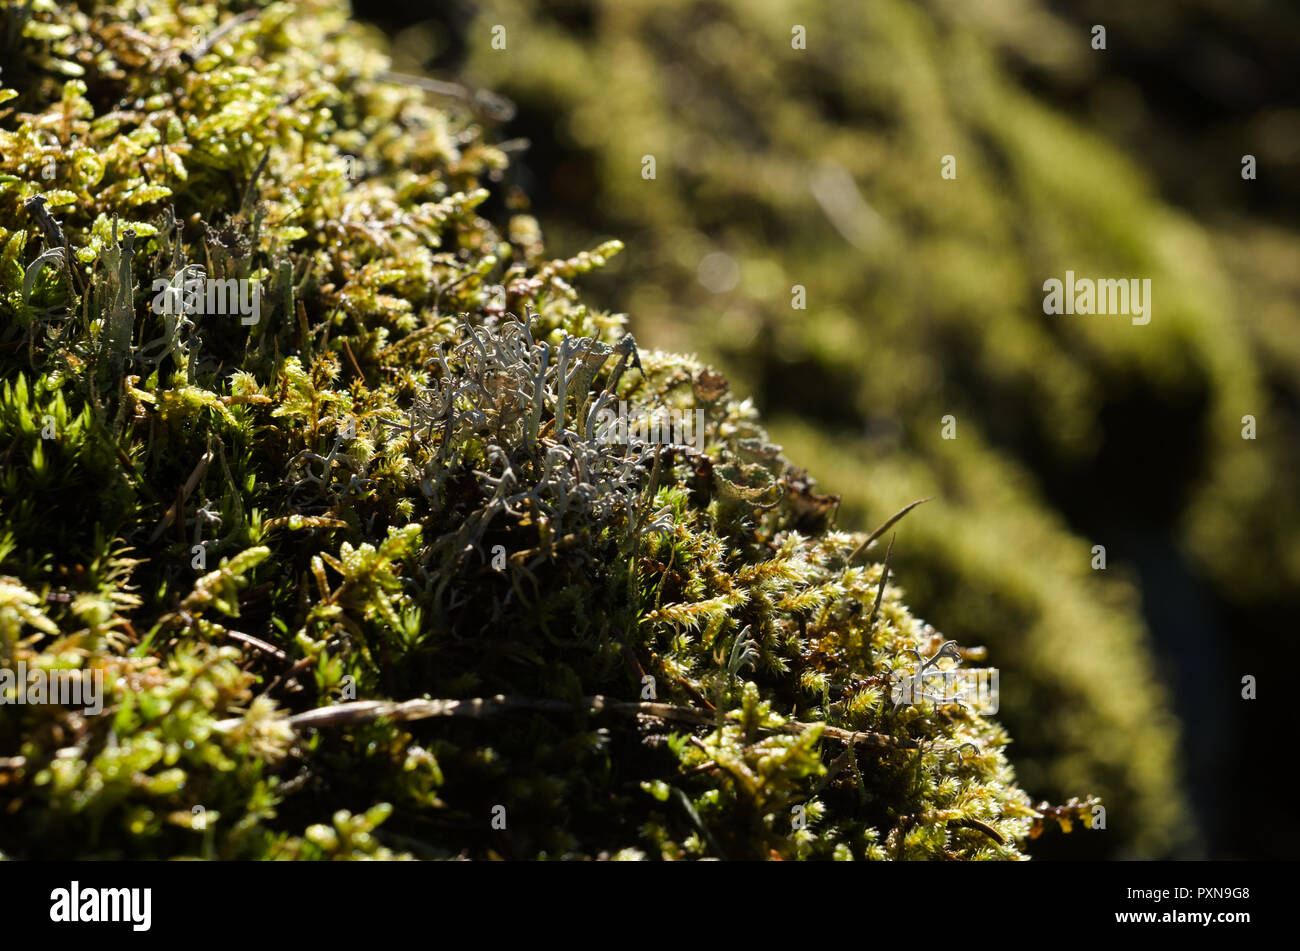 Small clumps of moss and lichens on rocks. Stock Photo